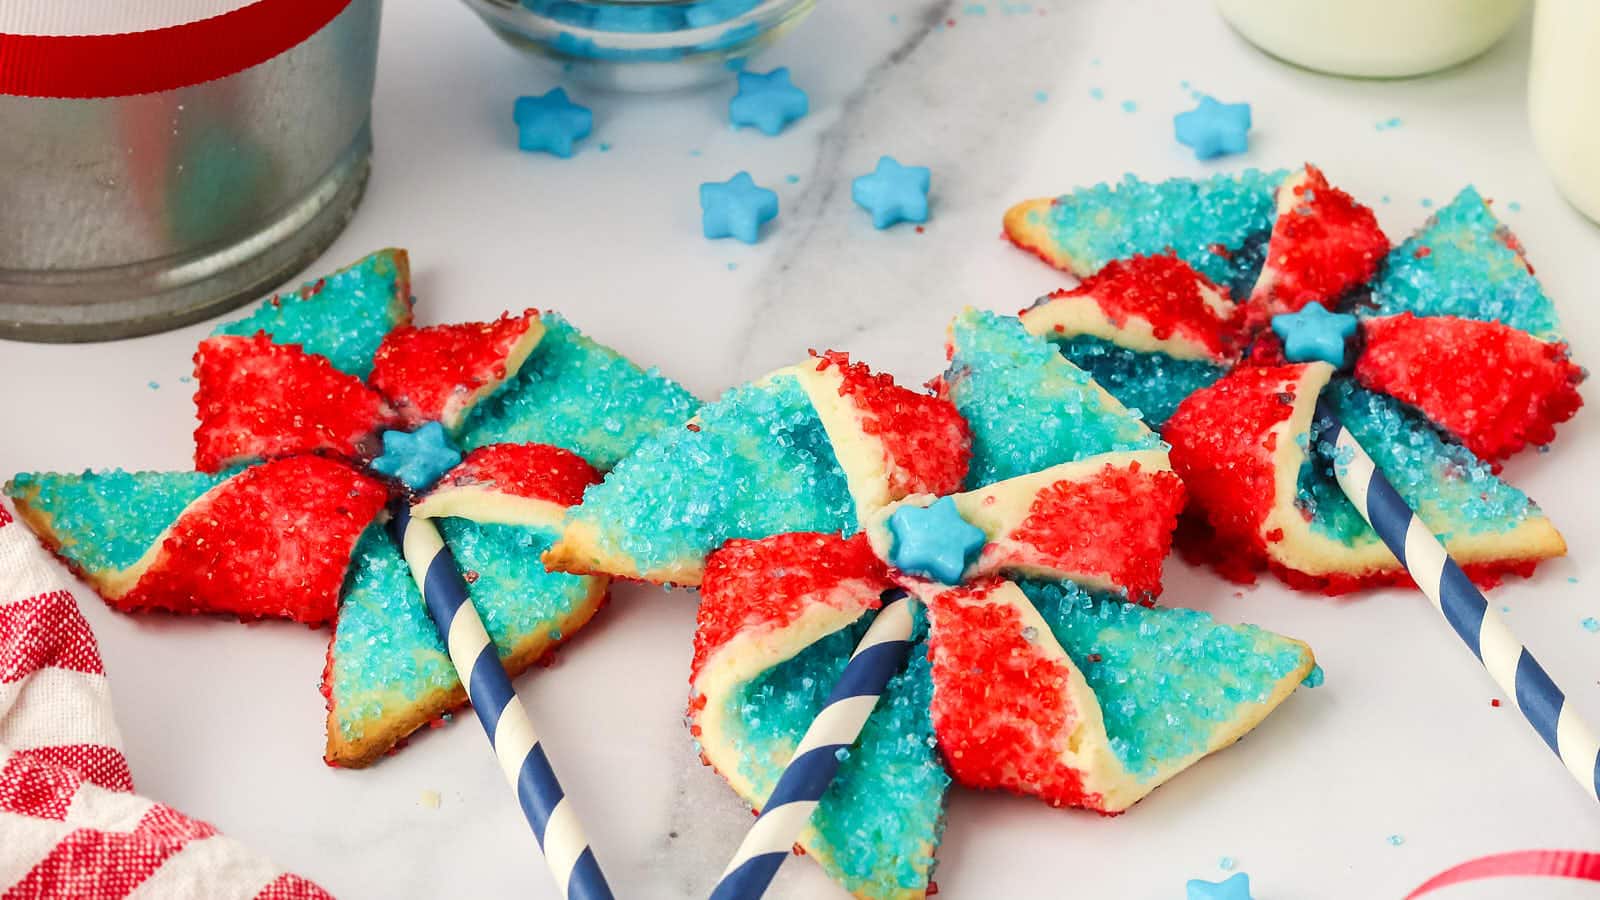 Pinwheel cookies decorated with red, white and blue icing.